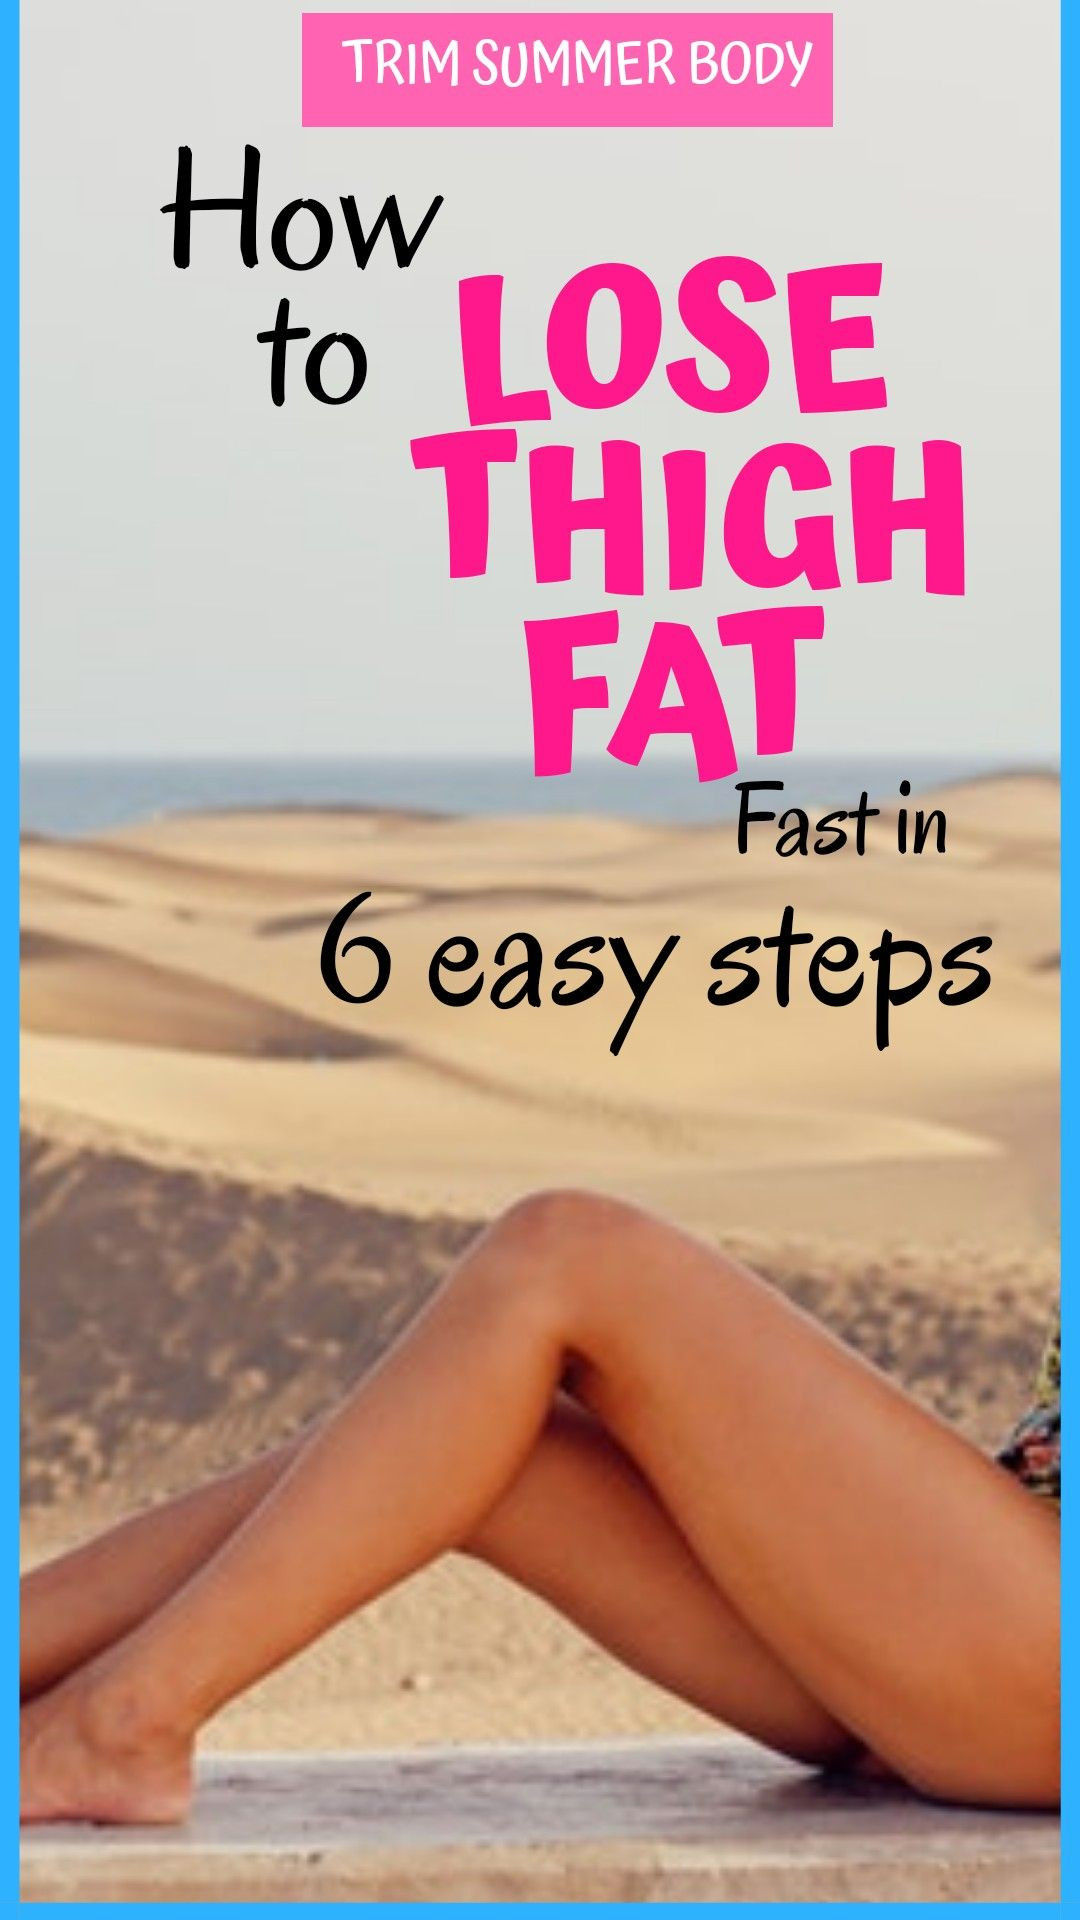 How To Lose Belly Fat Fast For Teens Lazy Girl
 Pin on Best Healthy Living Tips From Pinterest munity